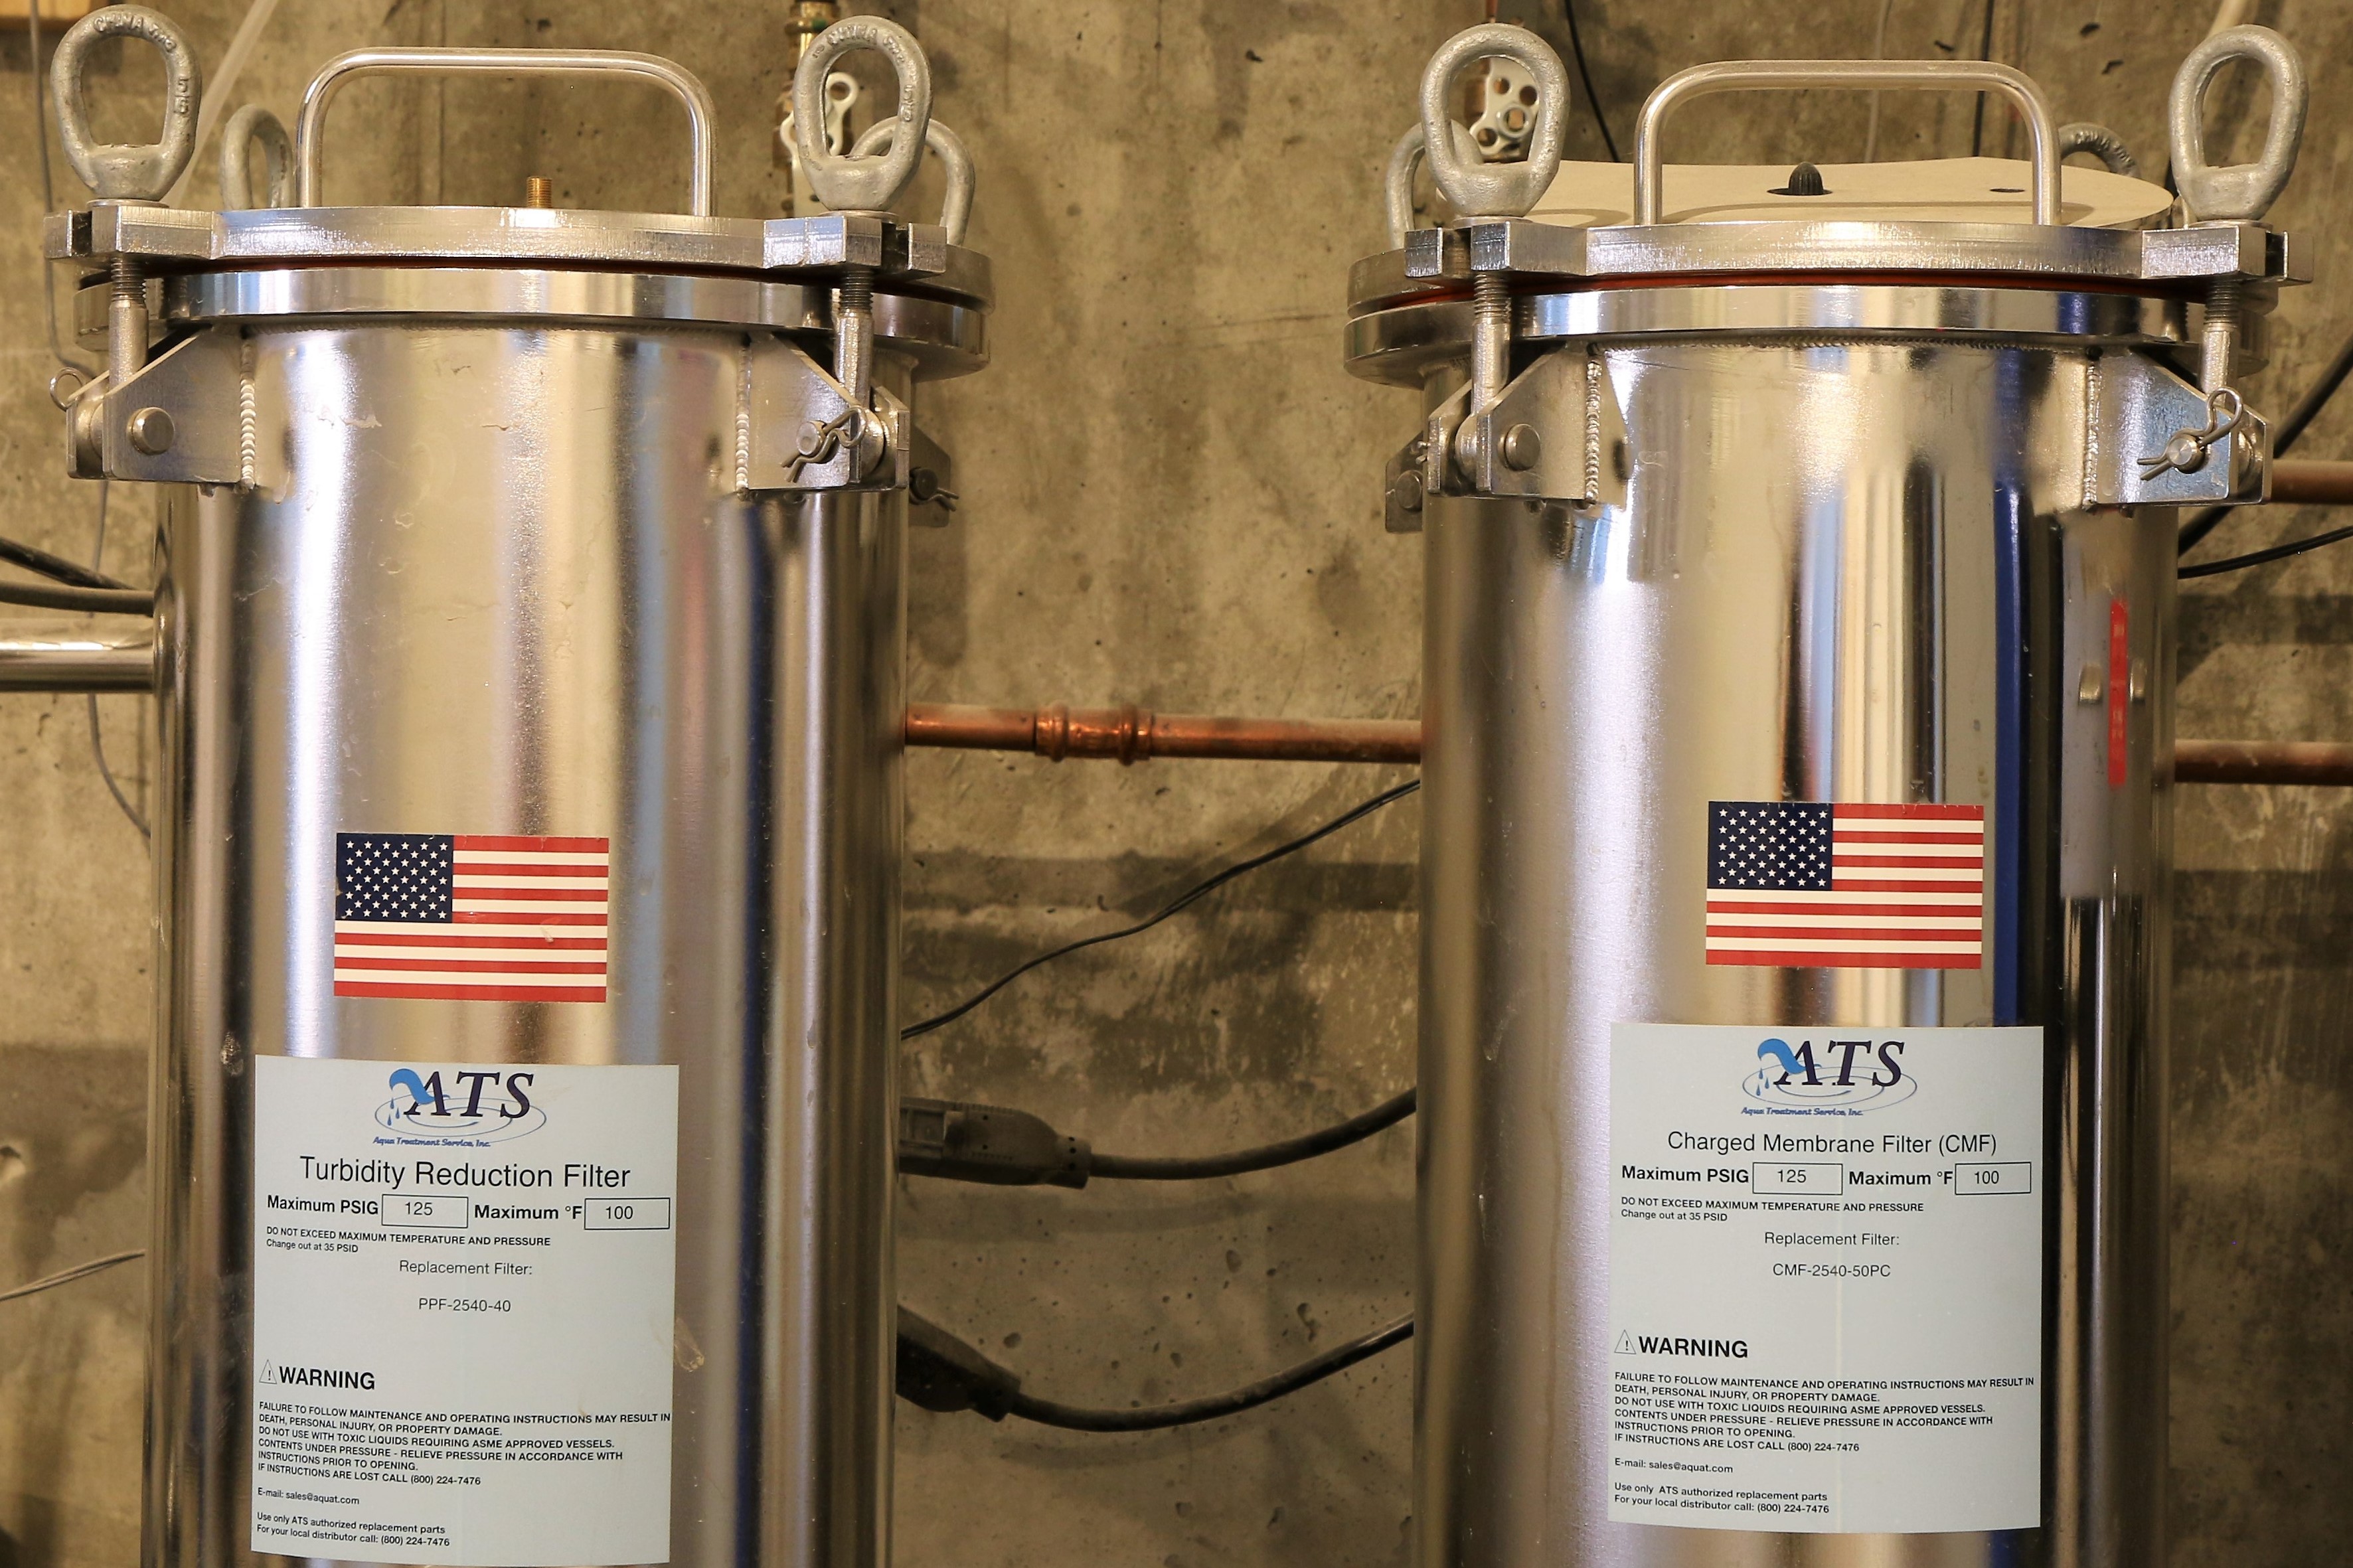 Two filters that are part of the building's rainwater-to-drinking water system, which when approved will make The Kendeda Building the smallest municipal water treatment system in Georgia.